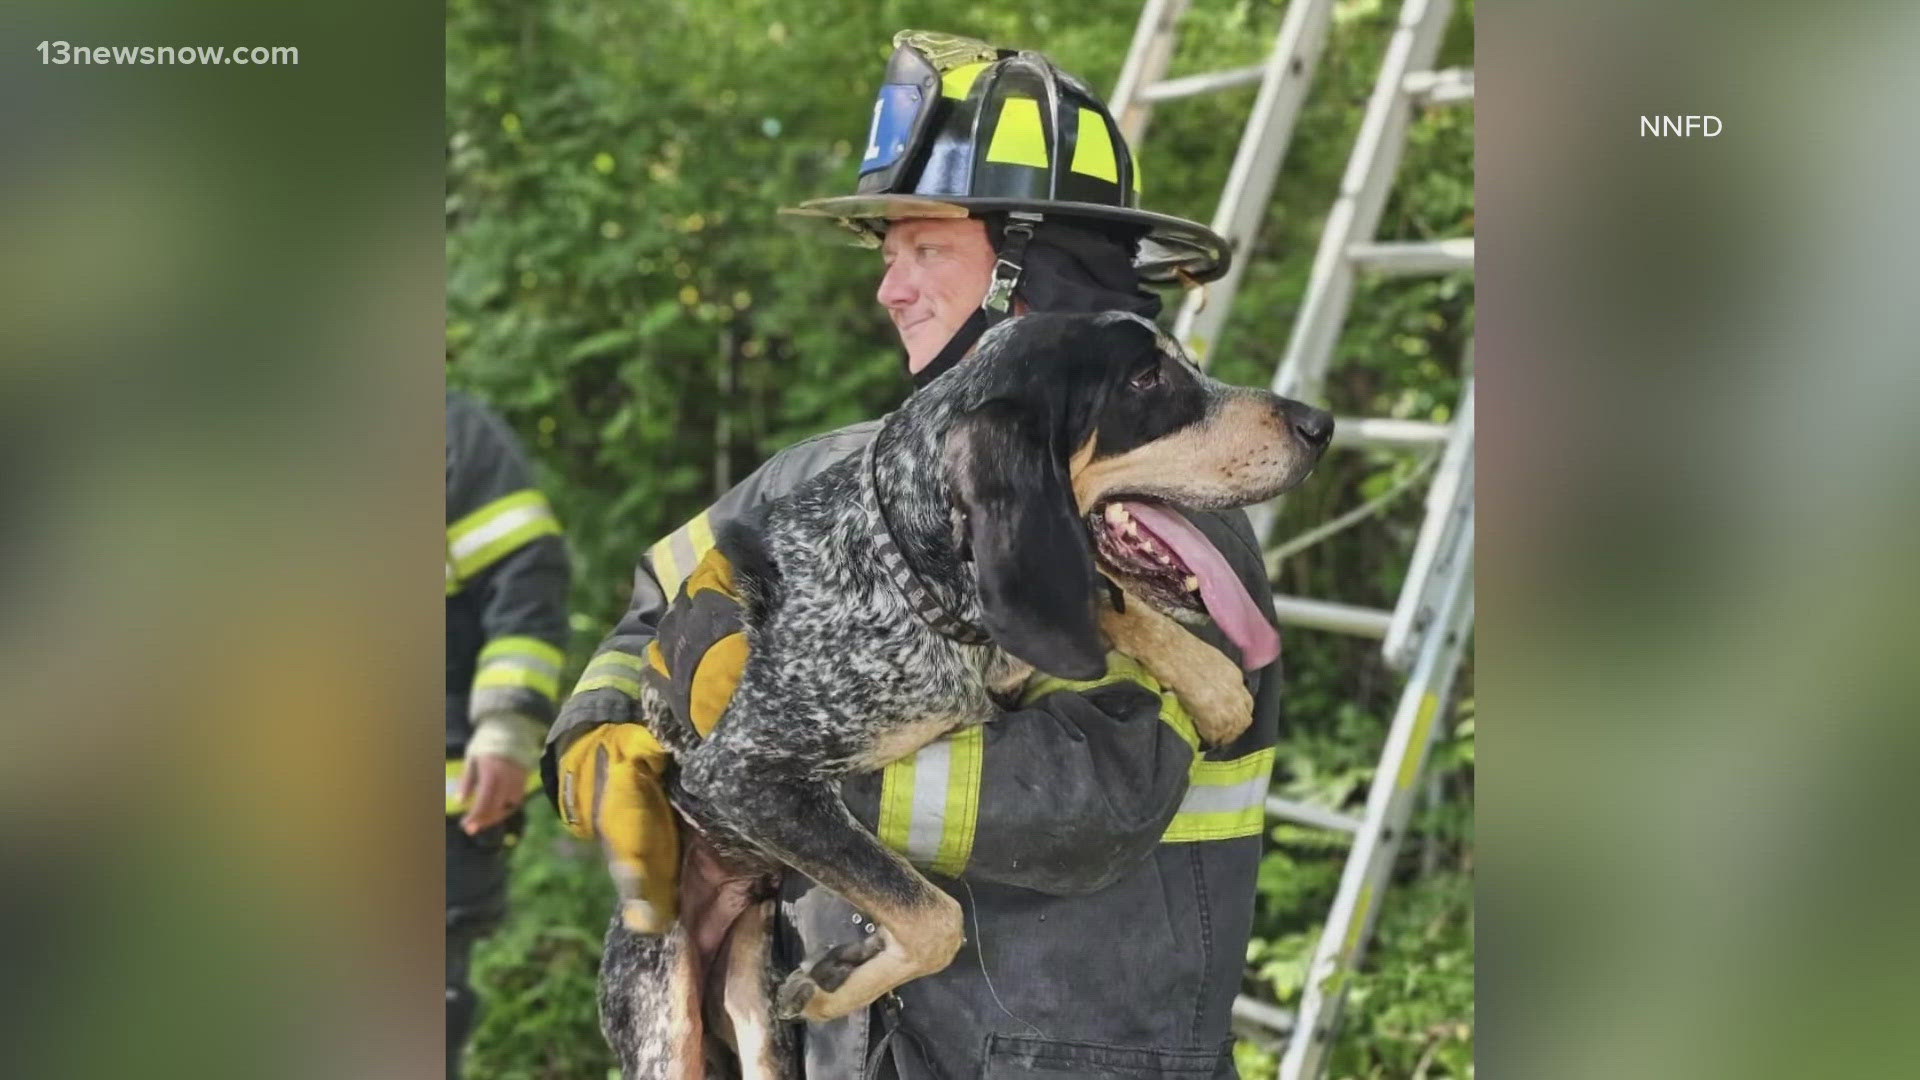 Firefighters in Newport News, Virginia were called to help 'Tater' out of a tree on Wednesday. The Blue Tick Hound got stuck about 20 feet up while chasing a cat.